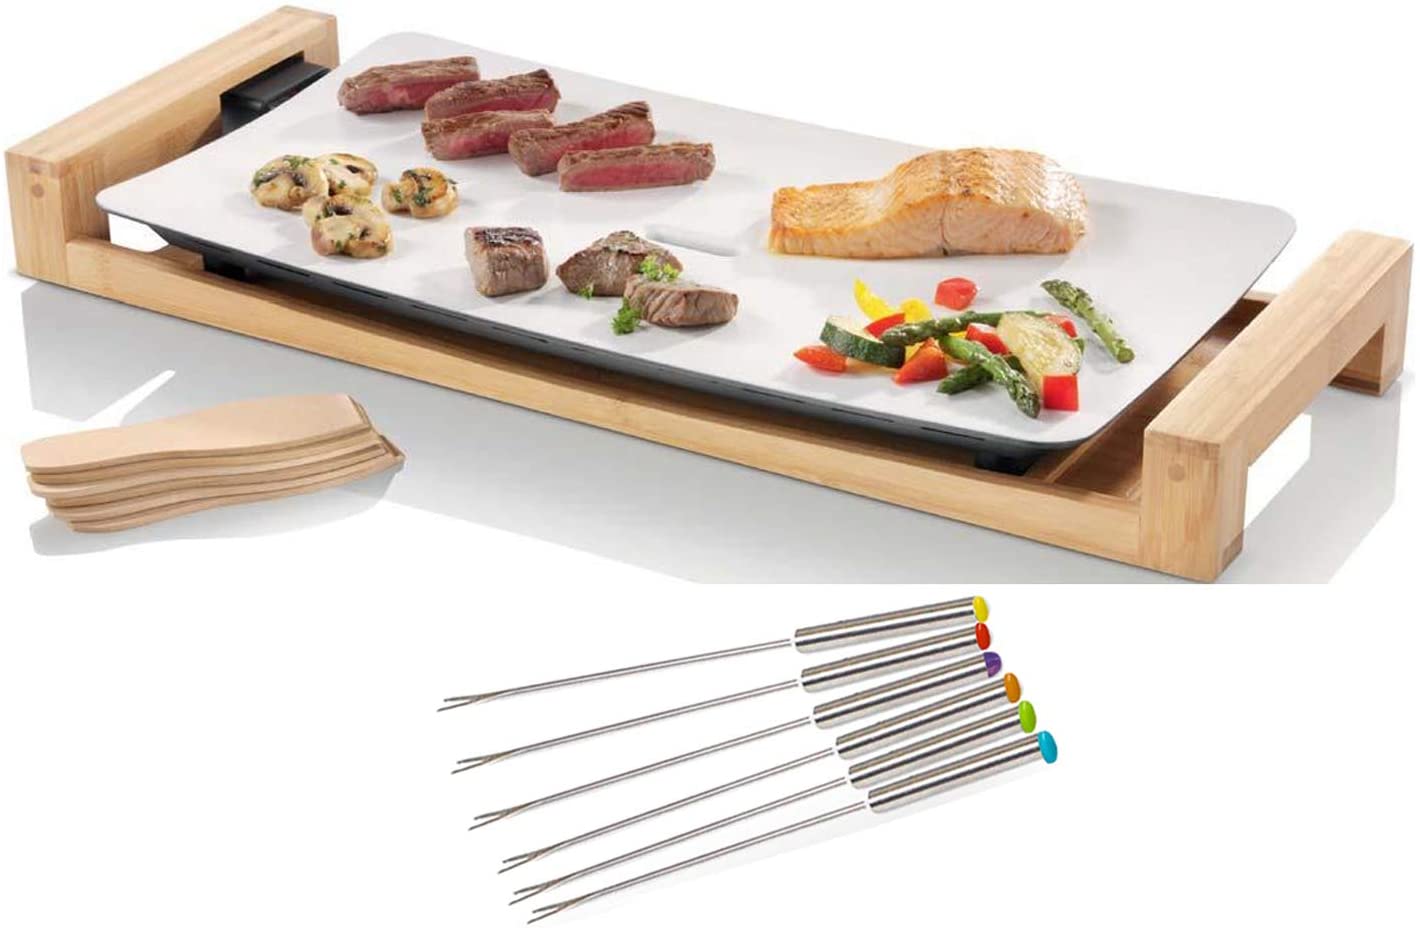 Princess Fun Cooking Teppanyaki Grill & 6 Teppan Forks, Table Grill for Balcony, Electric Grill with Bamboo Casing, Large Grill Plate 25 x 50 cm, 2500 Watt